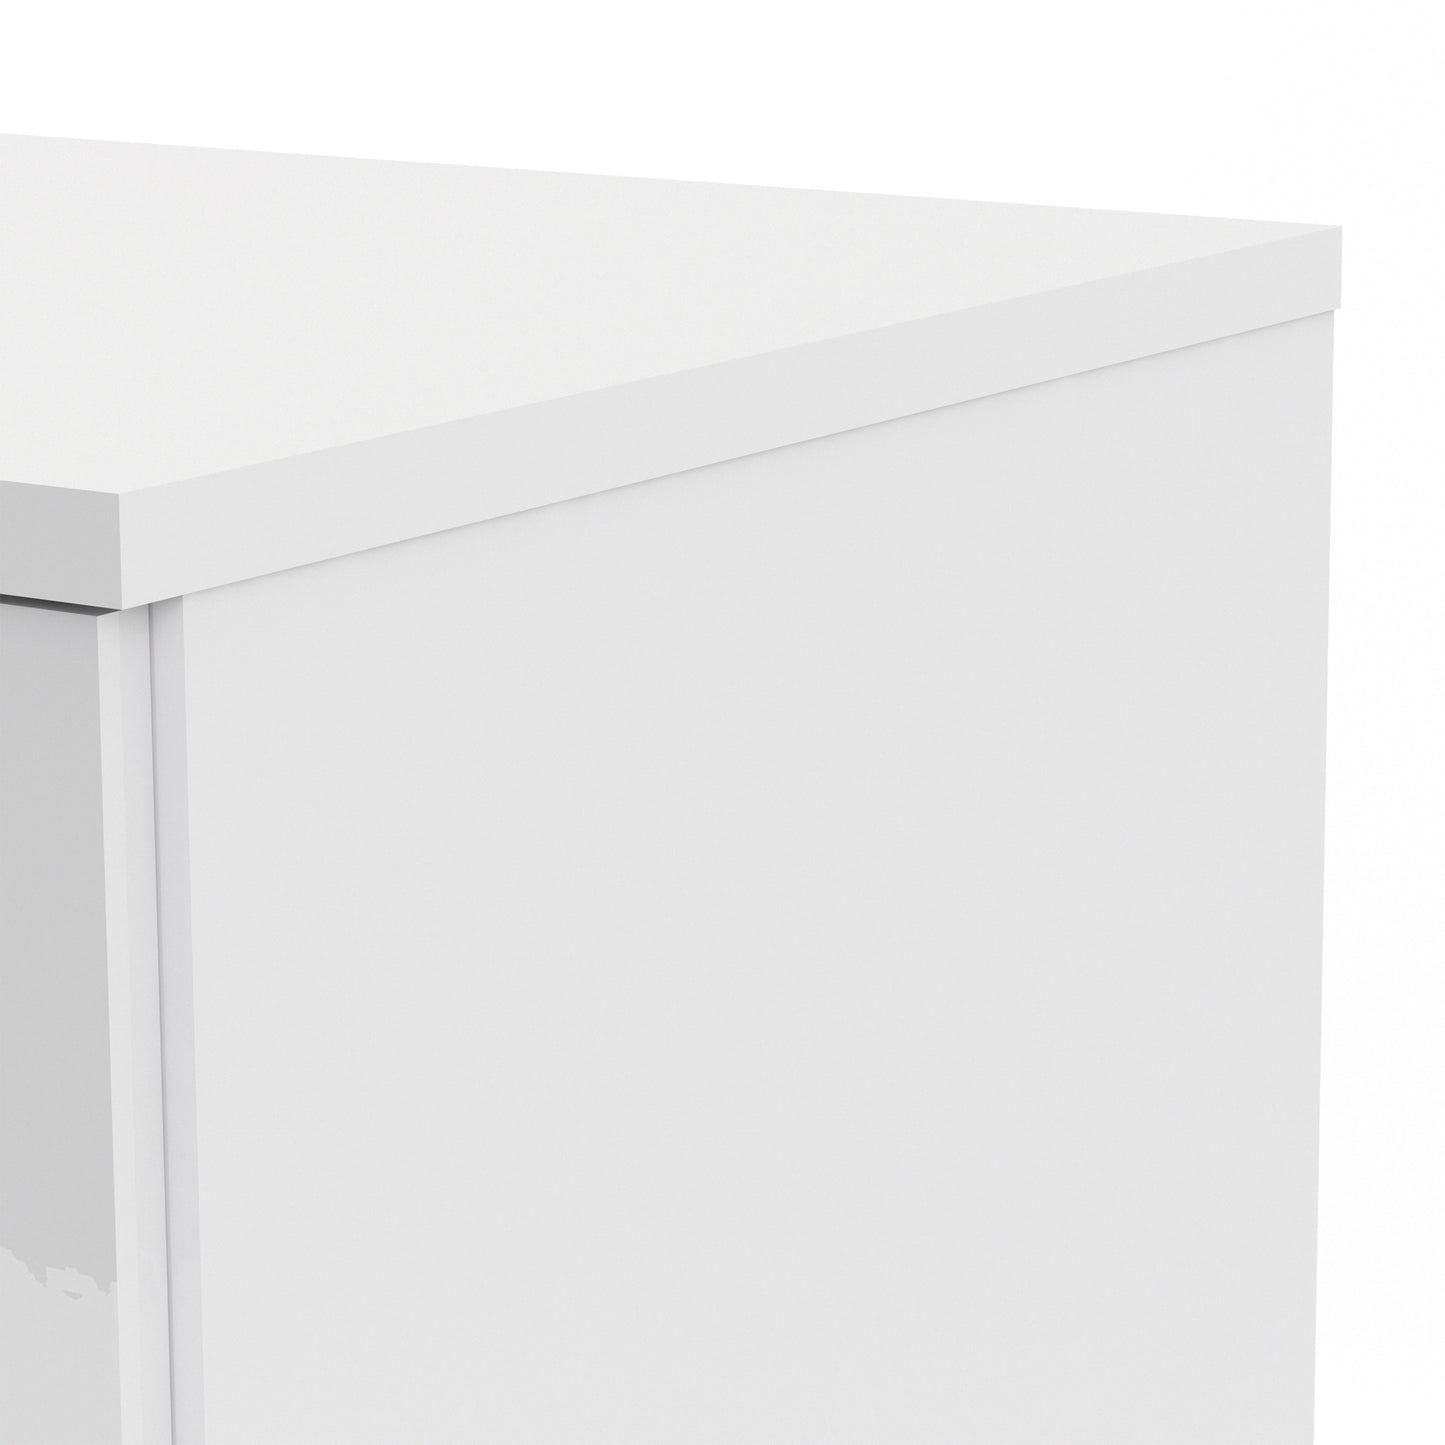 Naia  Wardrobe with 2 doors + 1 drawer in White High Gloss